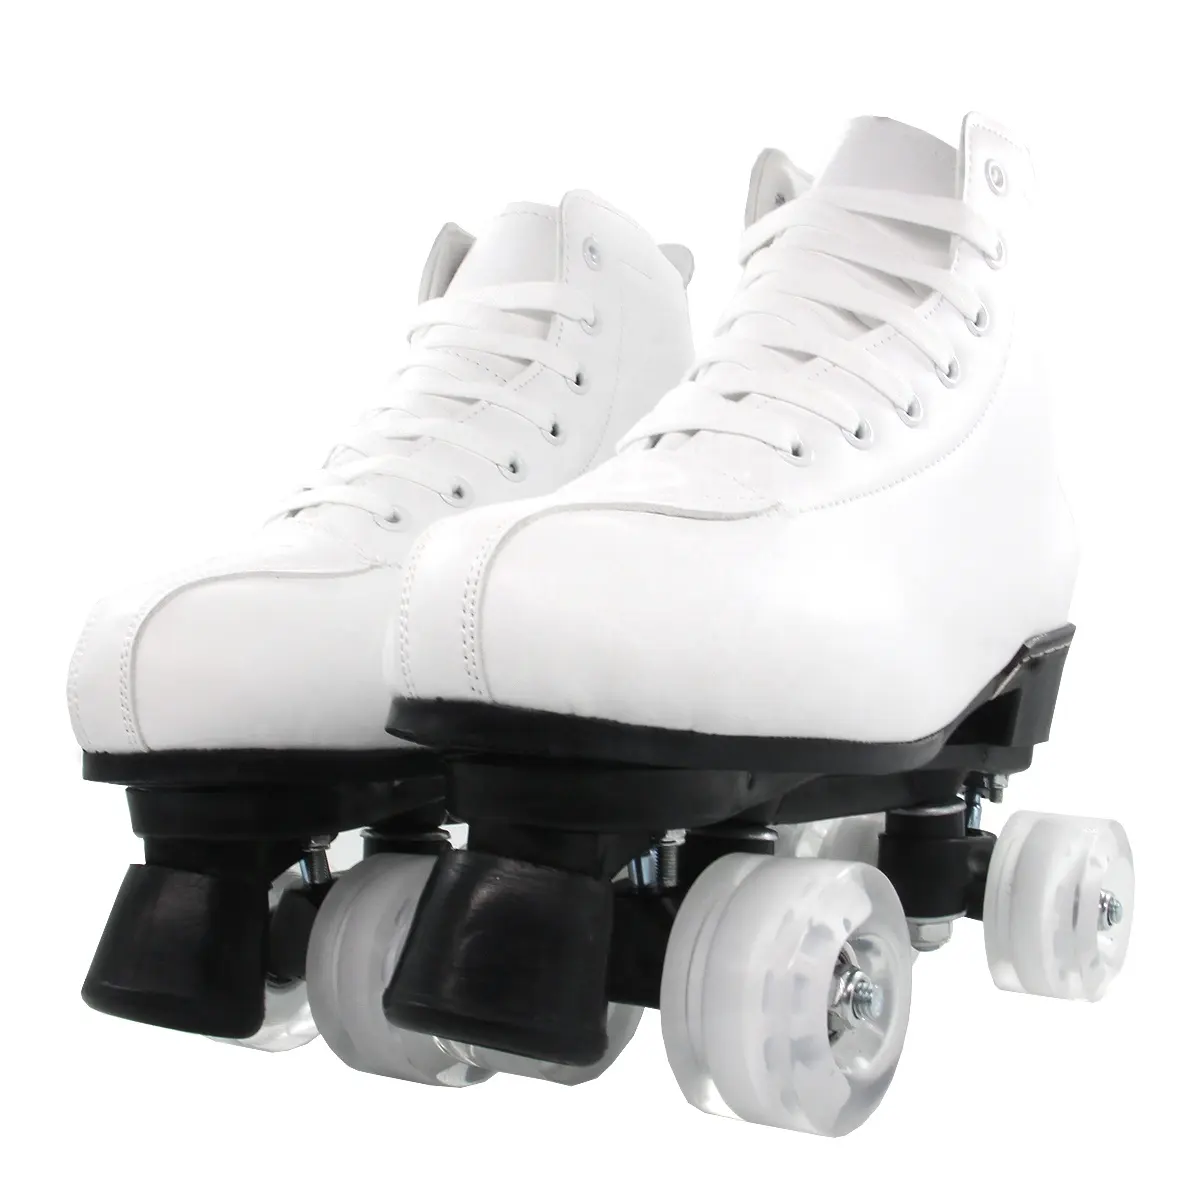 Customized 4 Wheel Girls Adults Woman Quad Roller Skates,skate roller shoes with PU wheels